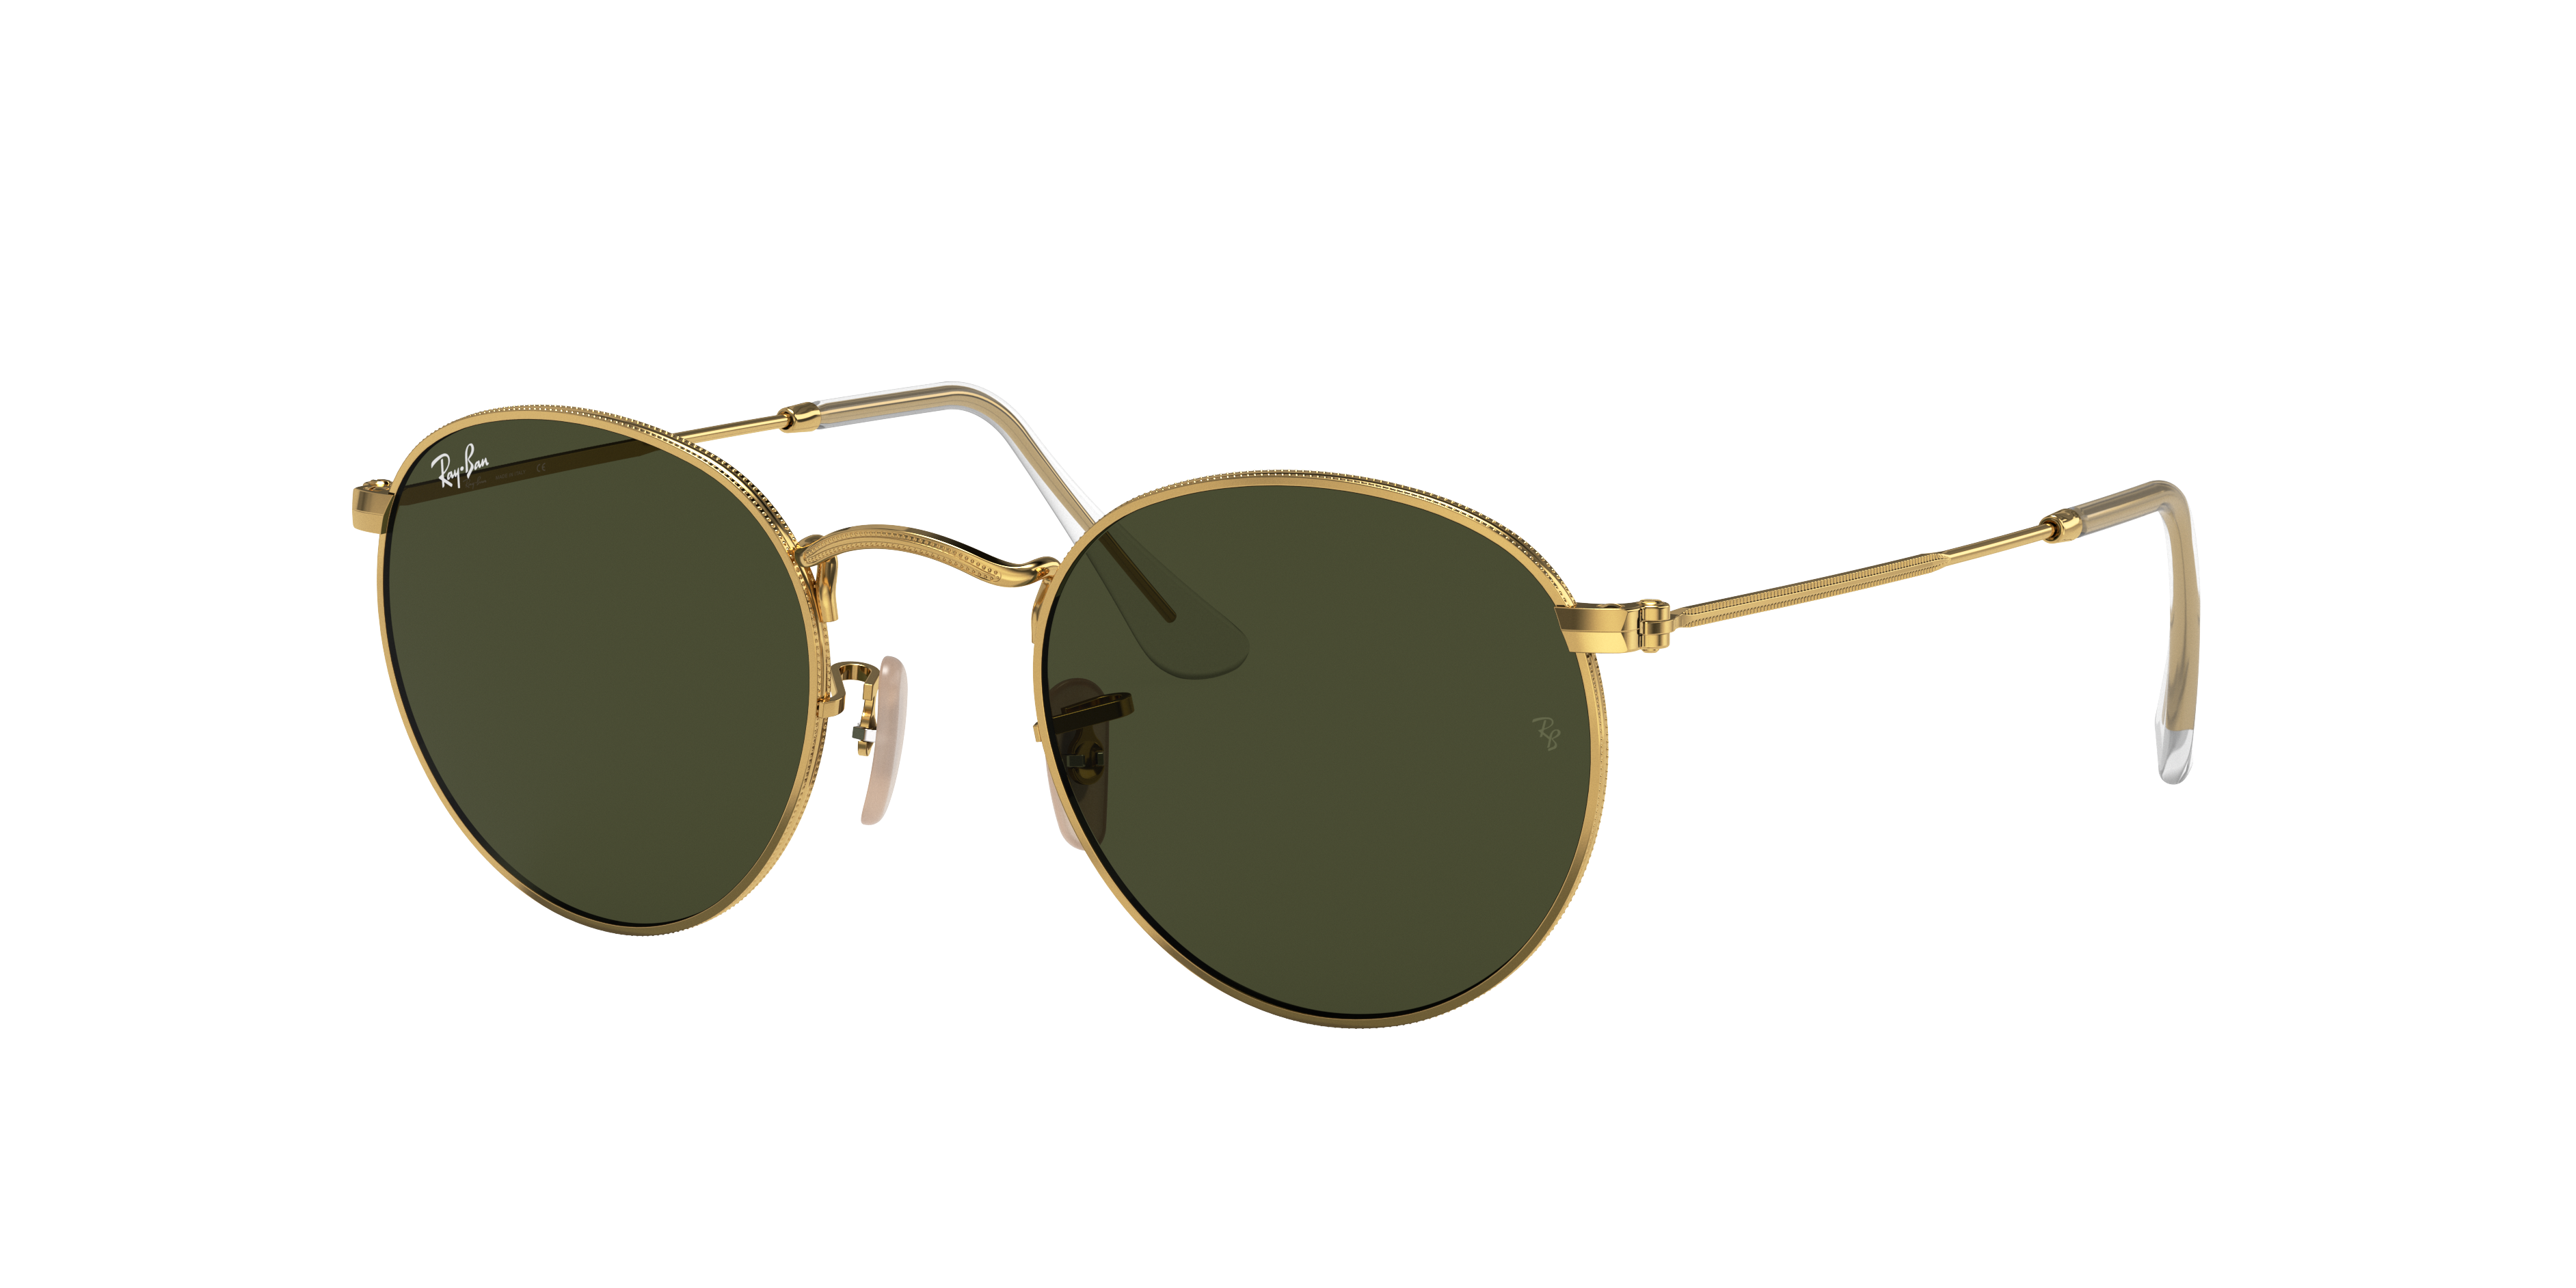 Check out the Round Metal at ray-ban.com